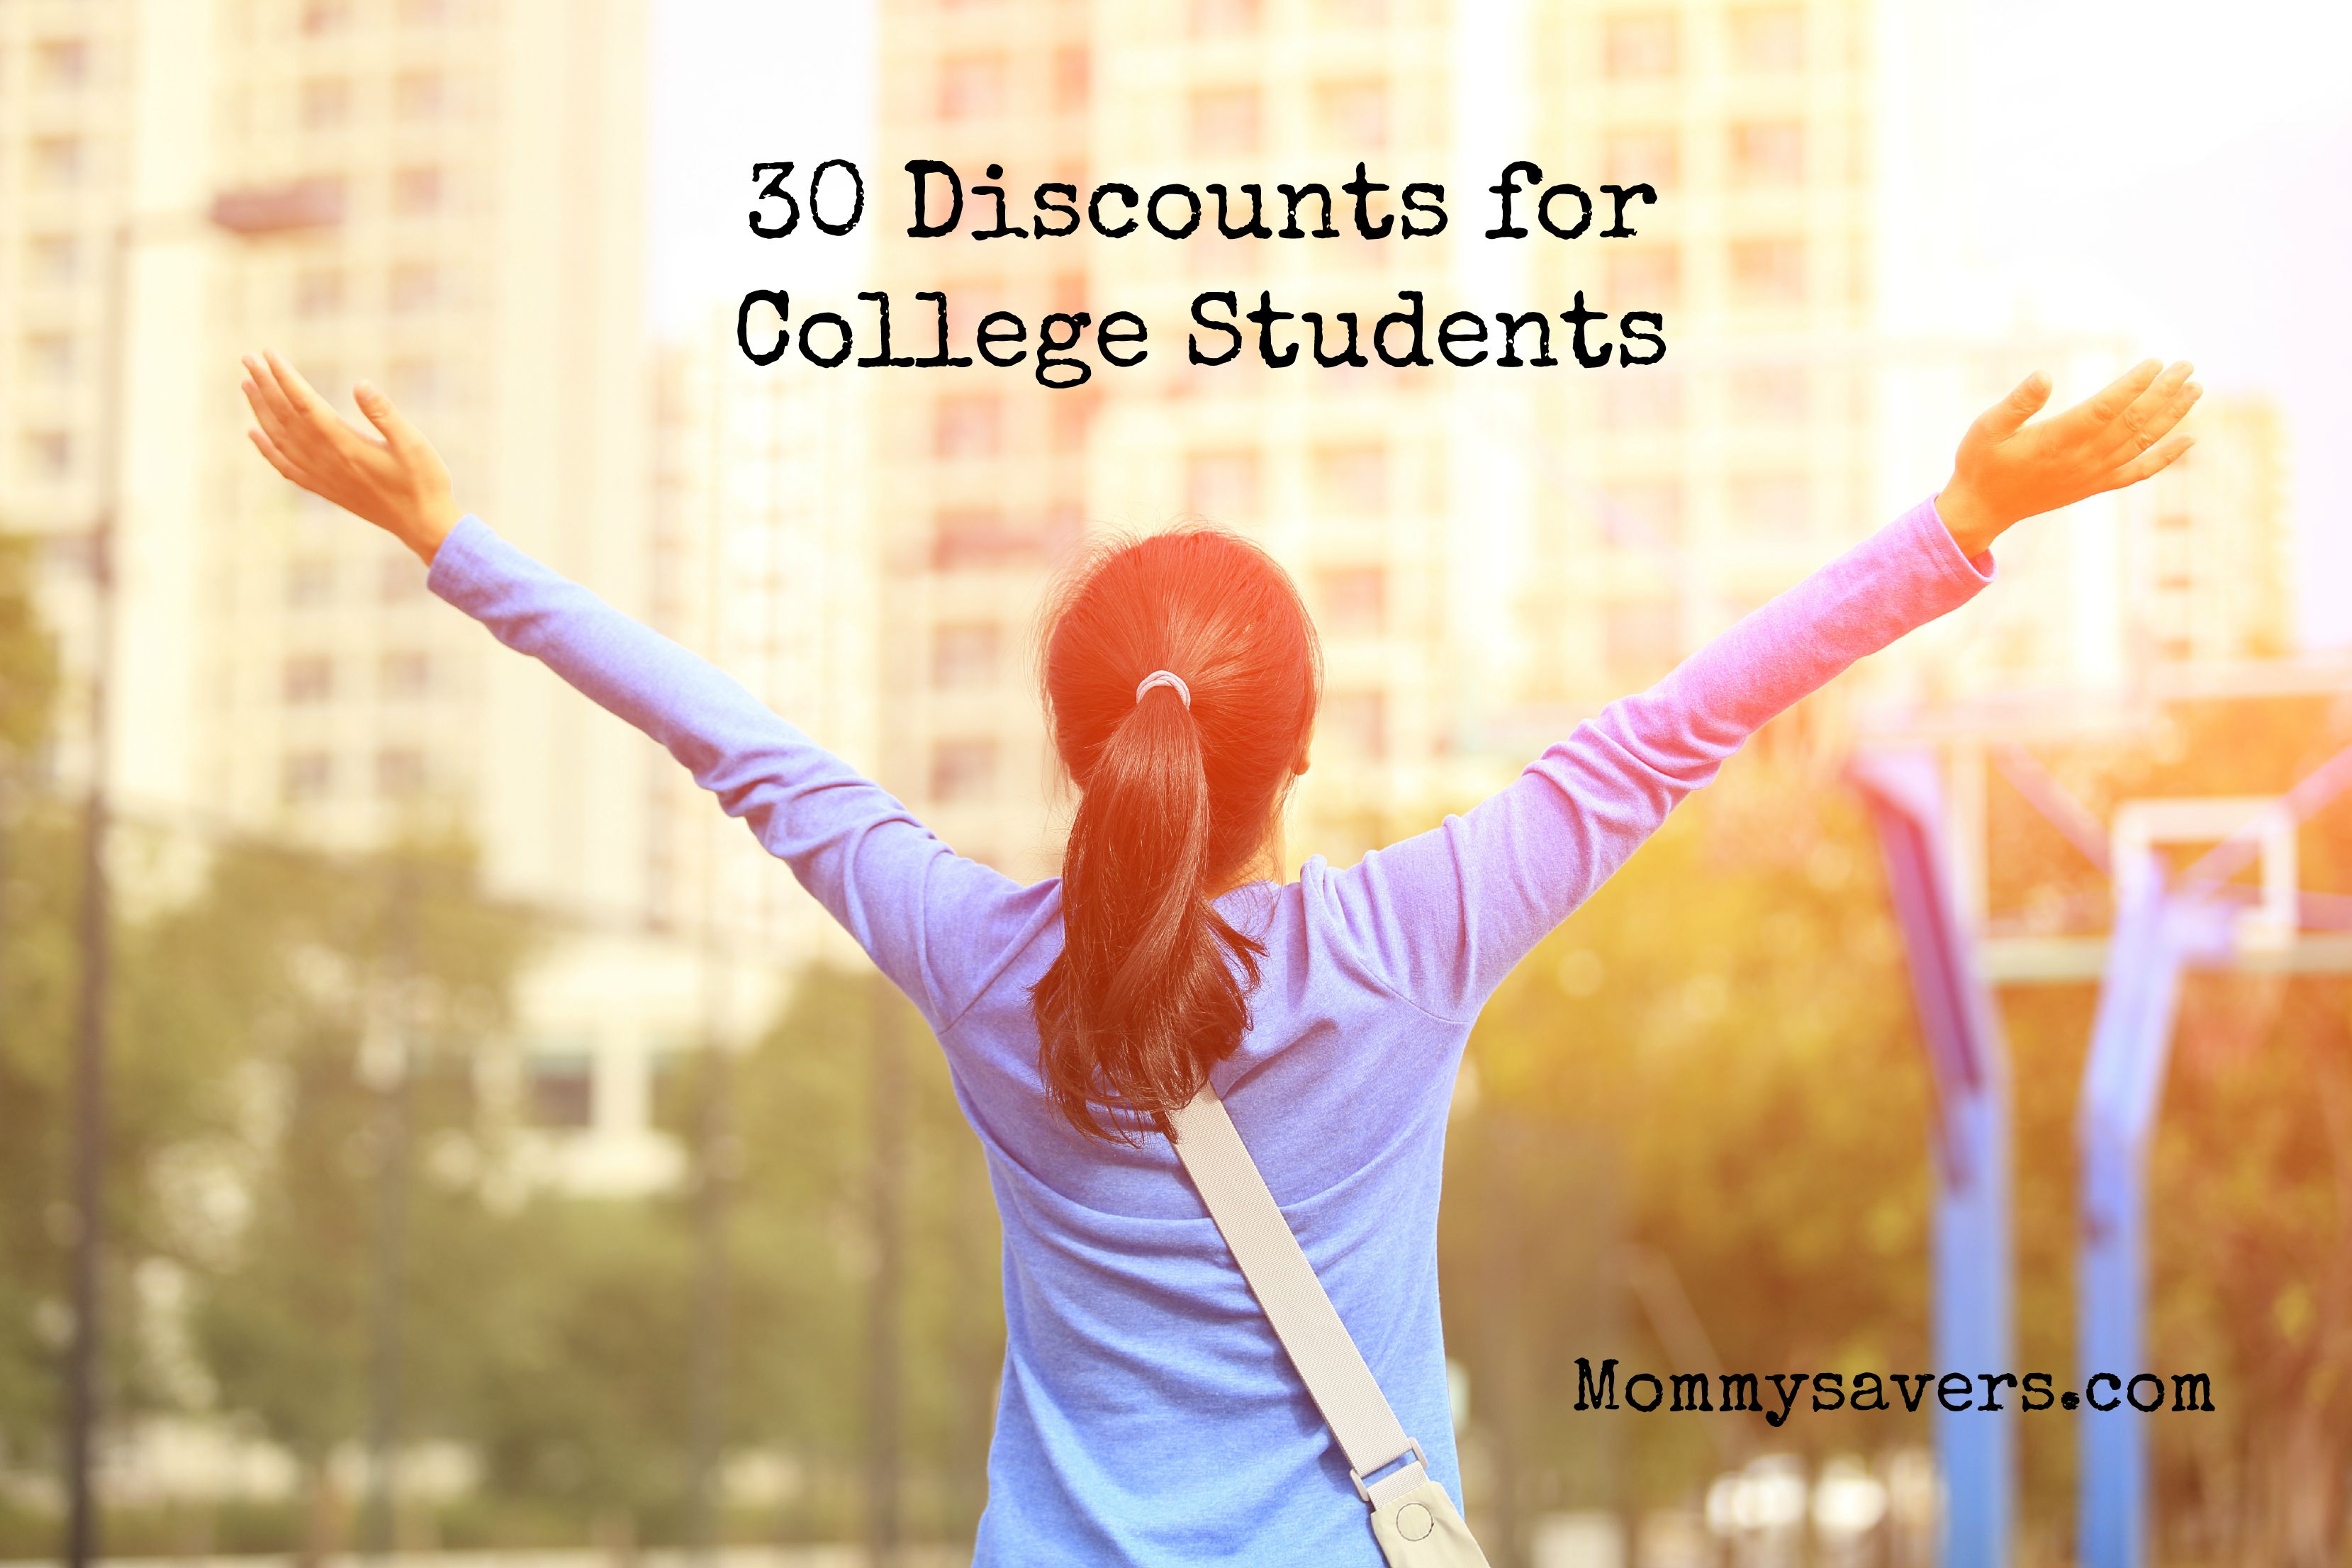 30 Discounts for College Students Mommysavers